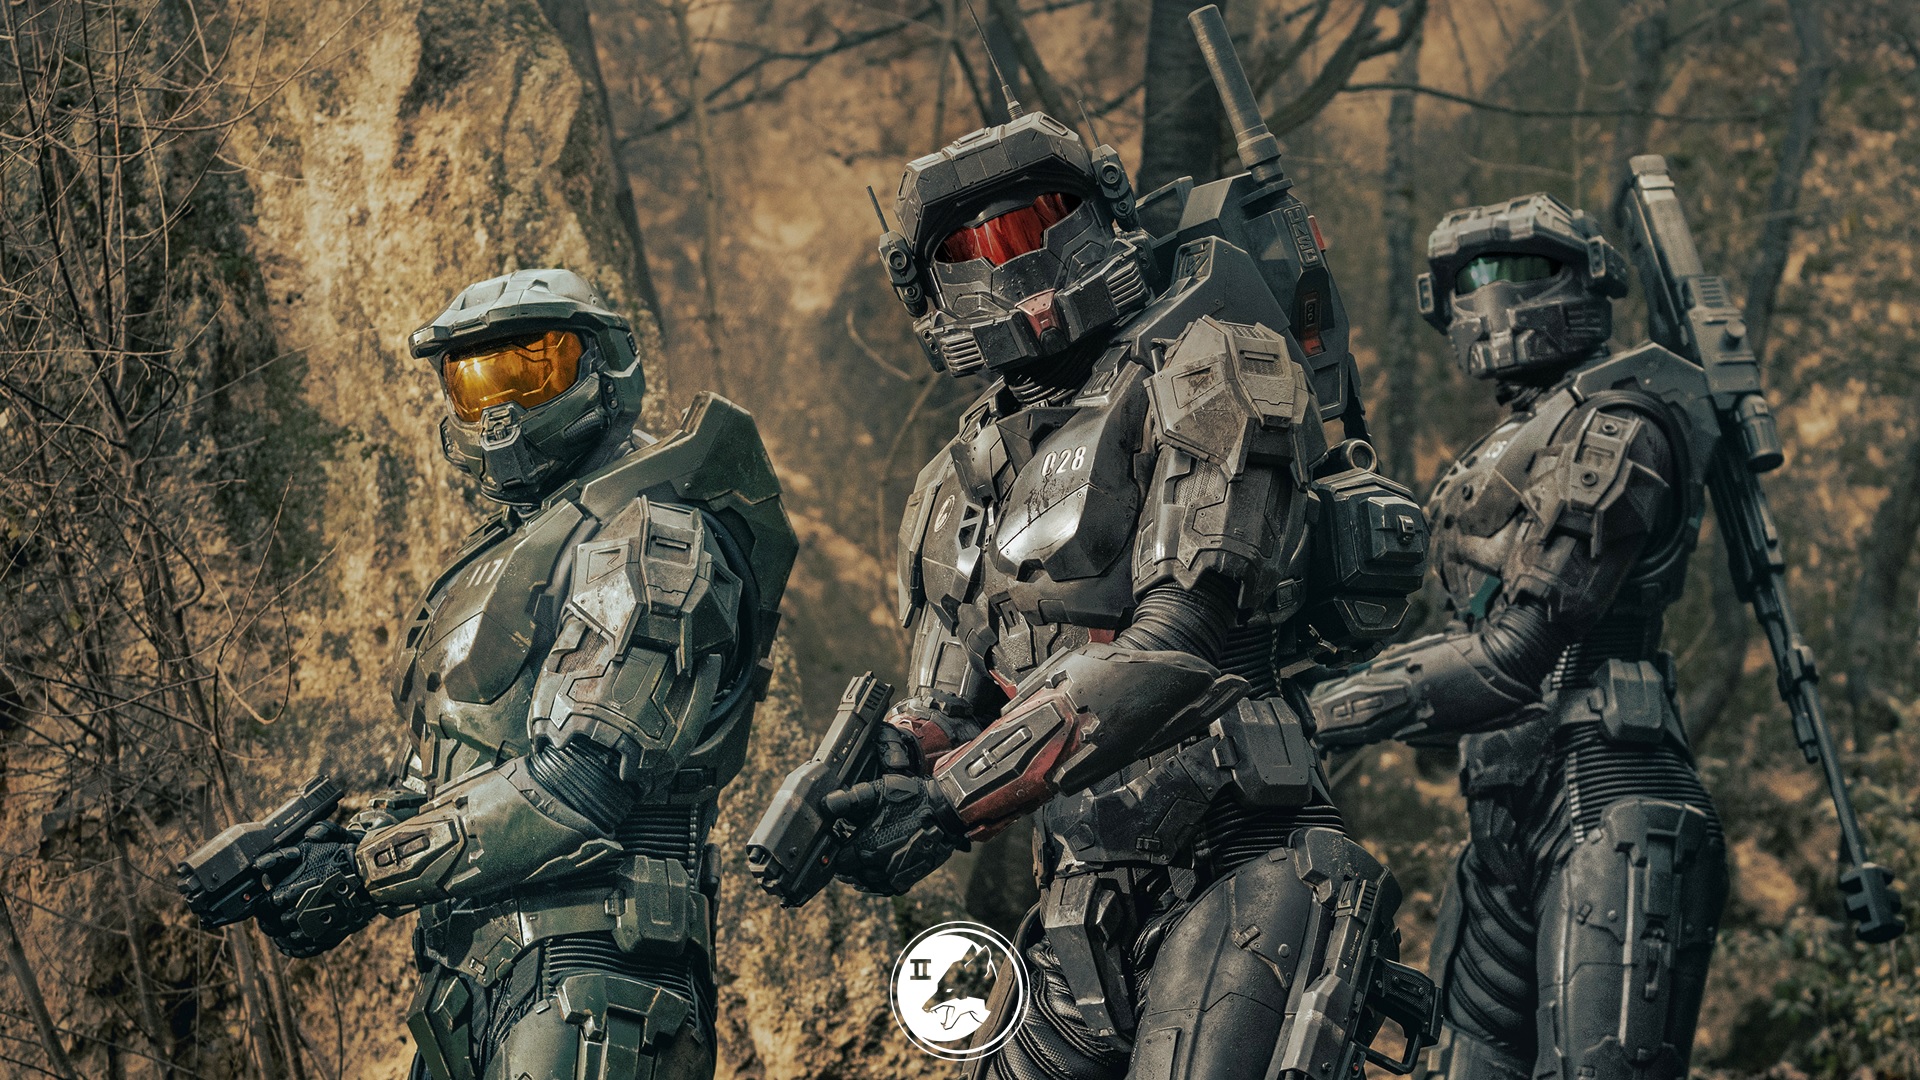 Halo episode 4 release date, time and plot preview